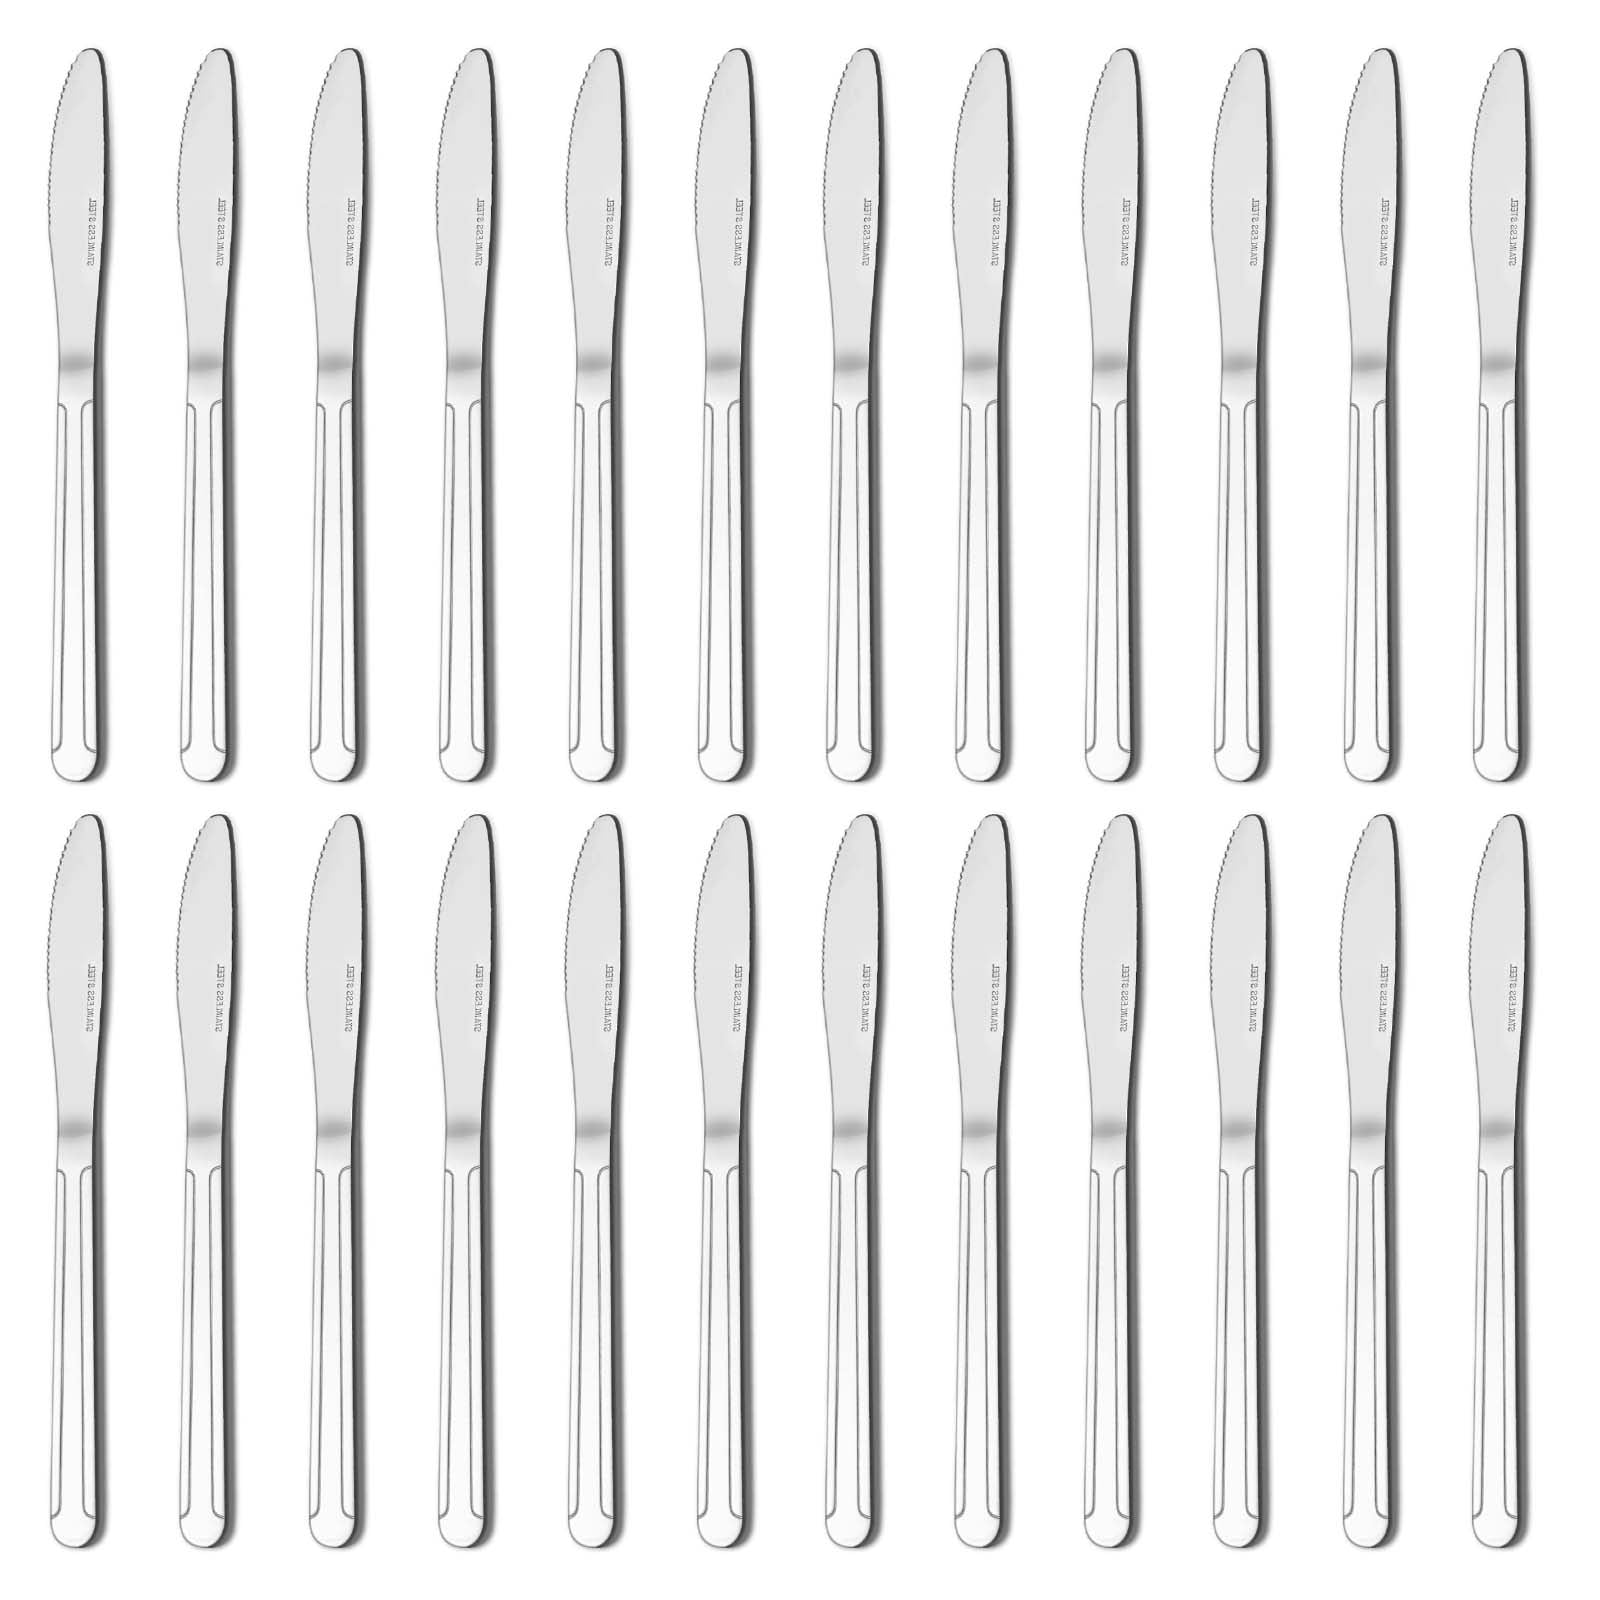 Funnydin 24 Pieces Dinner Knives Set, 8.1 Inches Table Knives Set, Durable  Butter Knife, Food Grade Stainless Steel Dinner Knife, Cost-effective